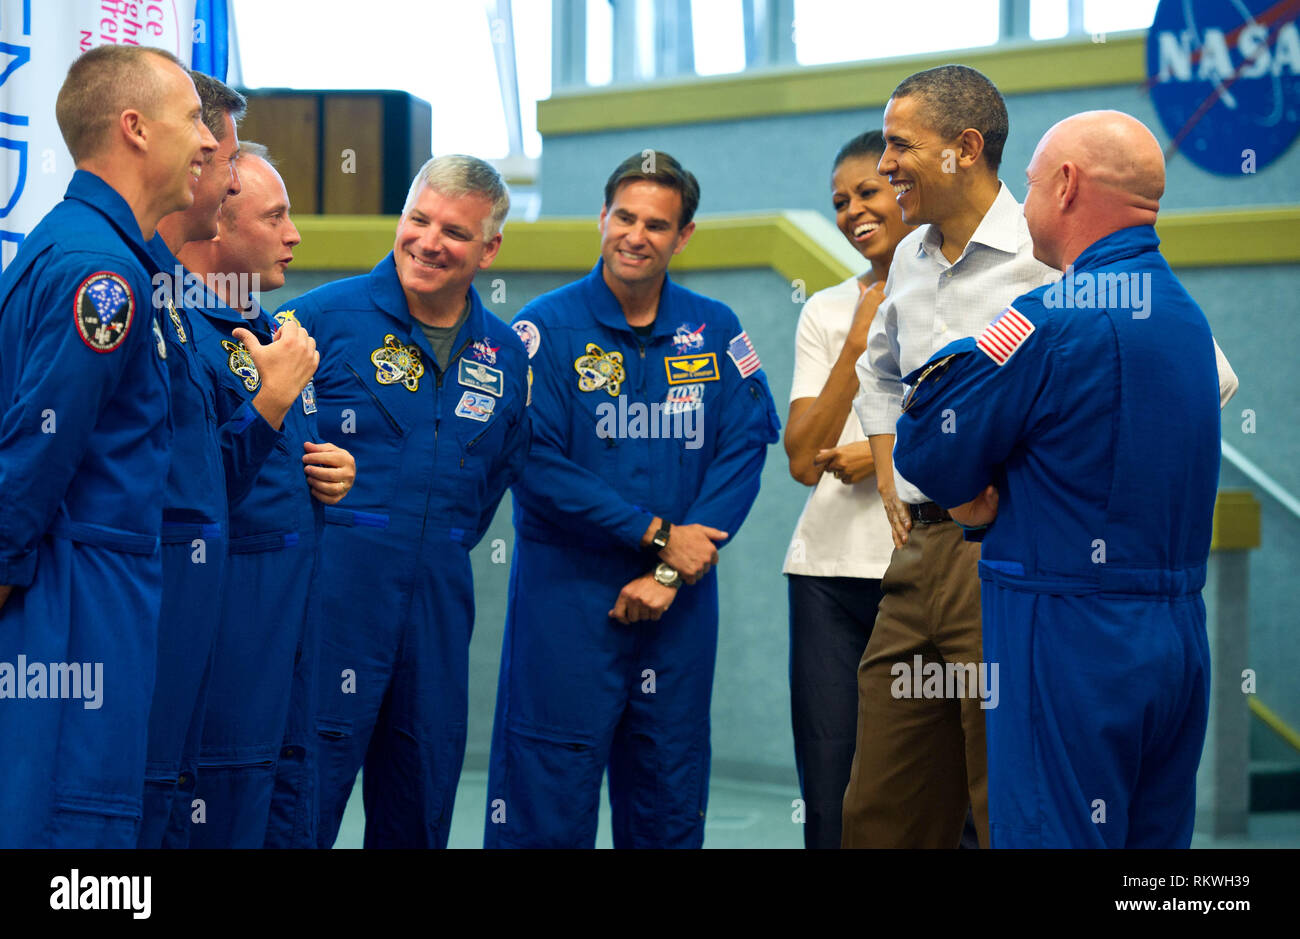 Cape Canaveral, Florida, USA. 29th Apr, 2011. United States President Barack Obama and First Lady Michelle Obama meet with STS-134 space shuttle Endeavor commander Mark Kelly, right, and shuttle astronauts, from left, Andrew Feustel, European Space Agency's Roberto Vittori, Michael Fincke, Gregory H. Johnson, and Greg Chamitoff, after their launch was scrubbed, Friday, April 29, 2011, at Kennedy Space Center in Cape Canaveral, Florida.Mandatory Credit: Bill Ingalls/NASA via CNP Credit: Bill Ingalls/CNP/ZUMA Wire/Alamy Live News Stock Photo